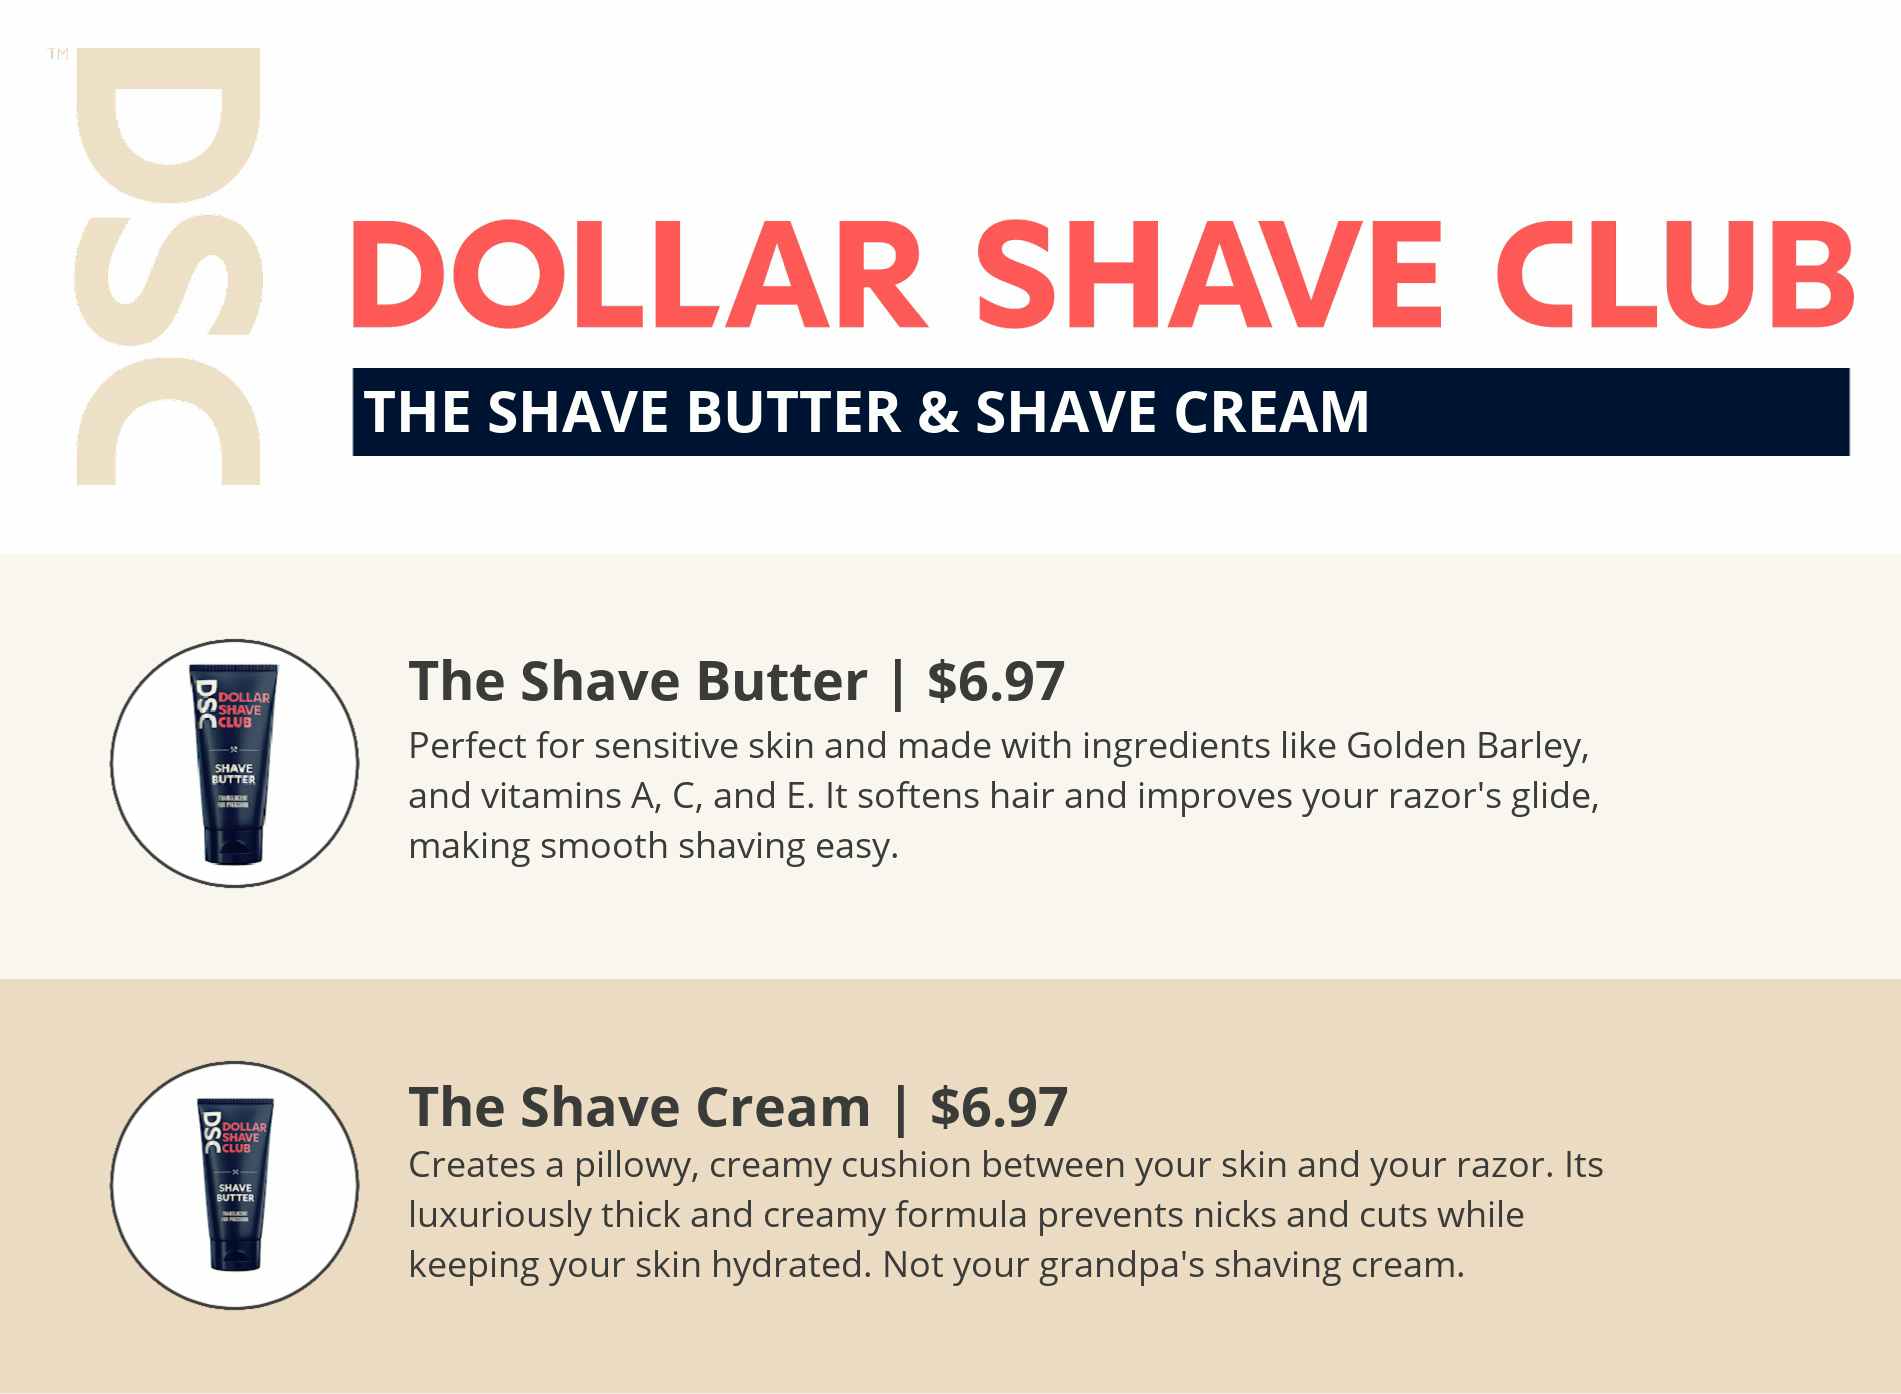 A graphic showing Dollar Shave Club's Shave Butter ($6.97) and Shave Cream ($6.97) explaining the features and benefits of each